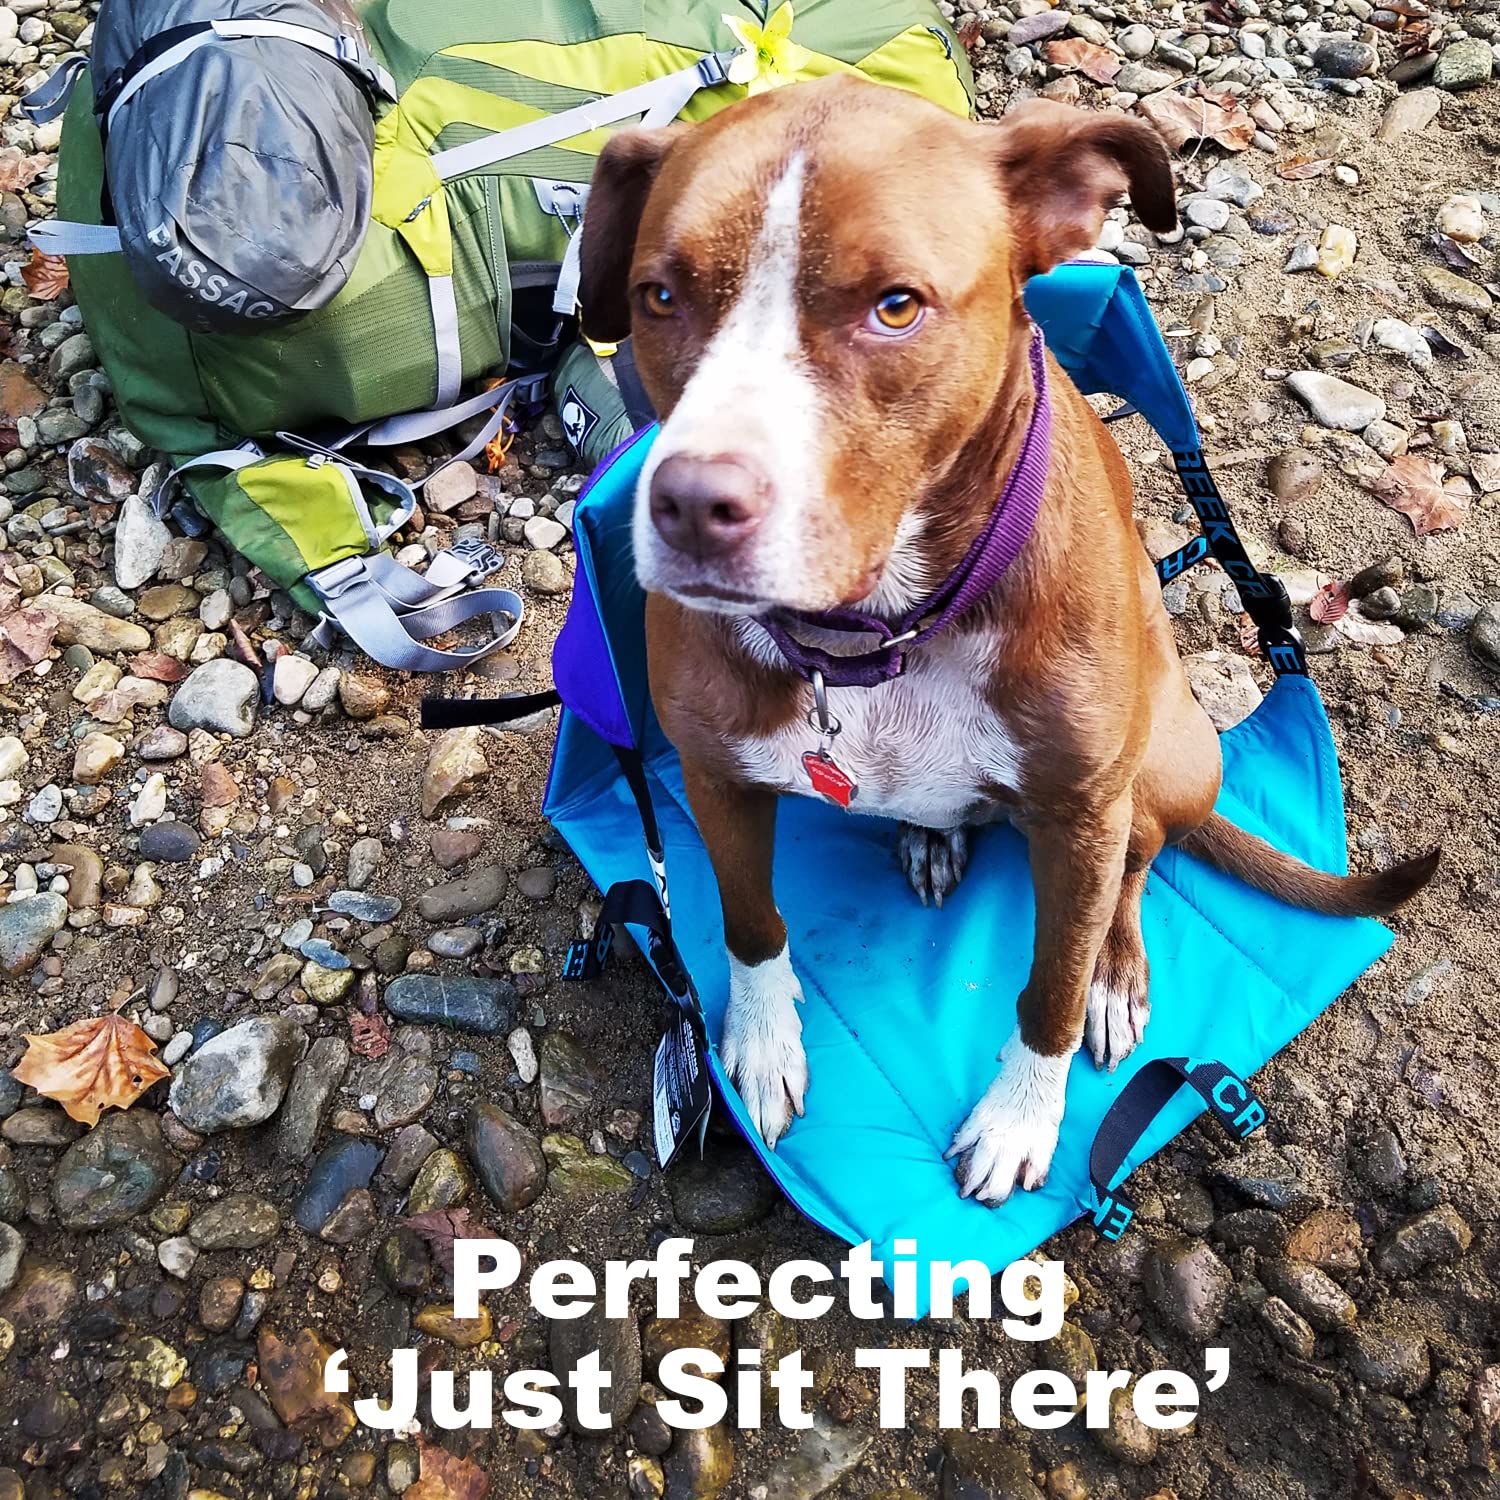 Crazy Creek Products Crazy Creek Original Chair Perfect for Stadium Seats, Camping, Hiking & More, Comfort on All Terrains, Adjustable Straps, Lightw